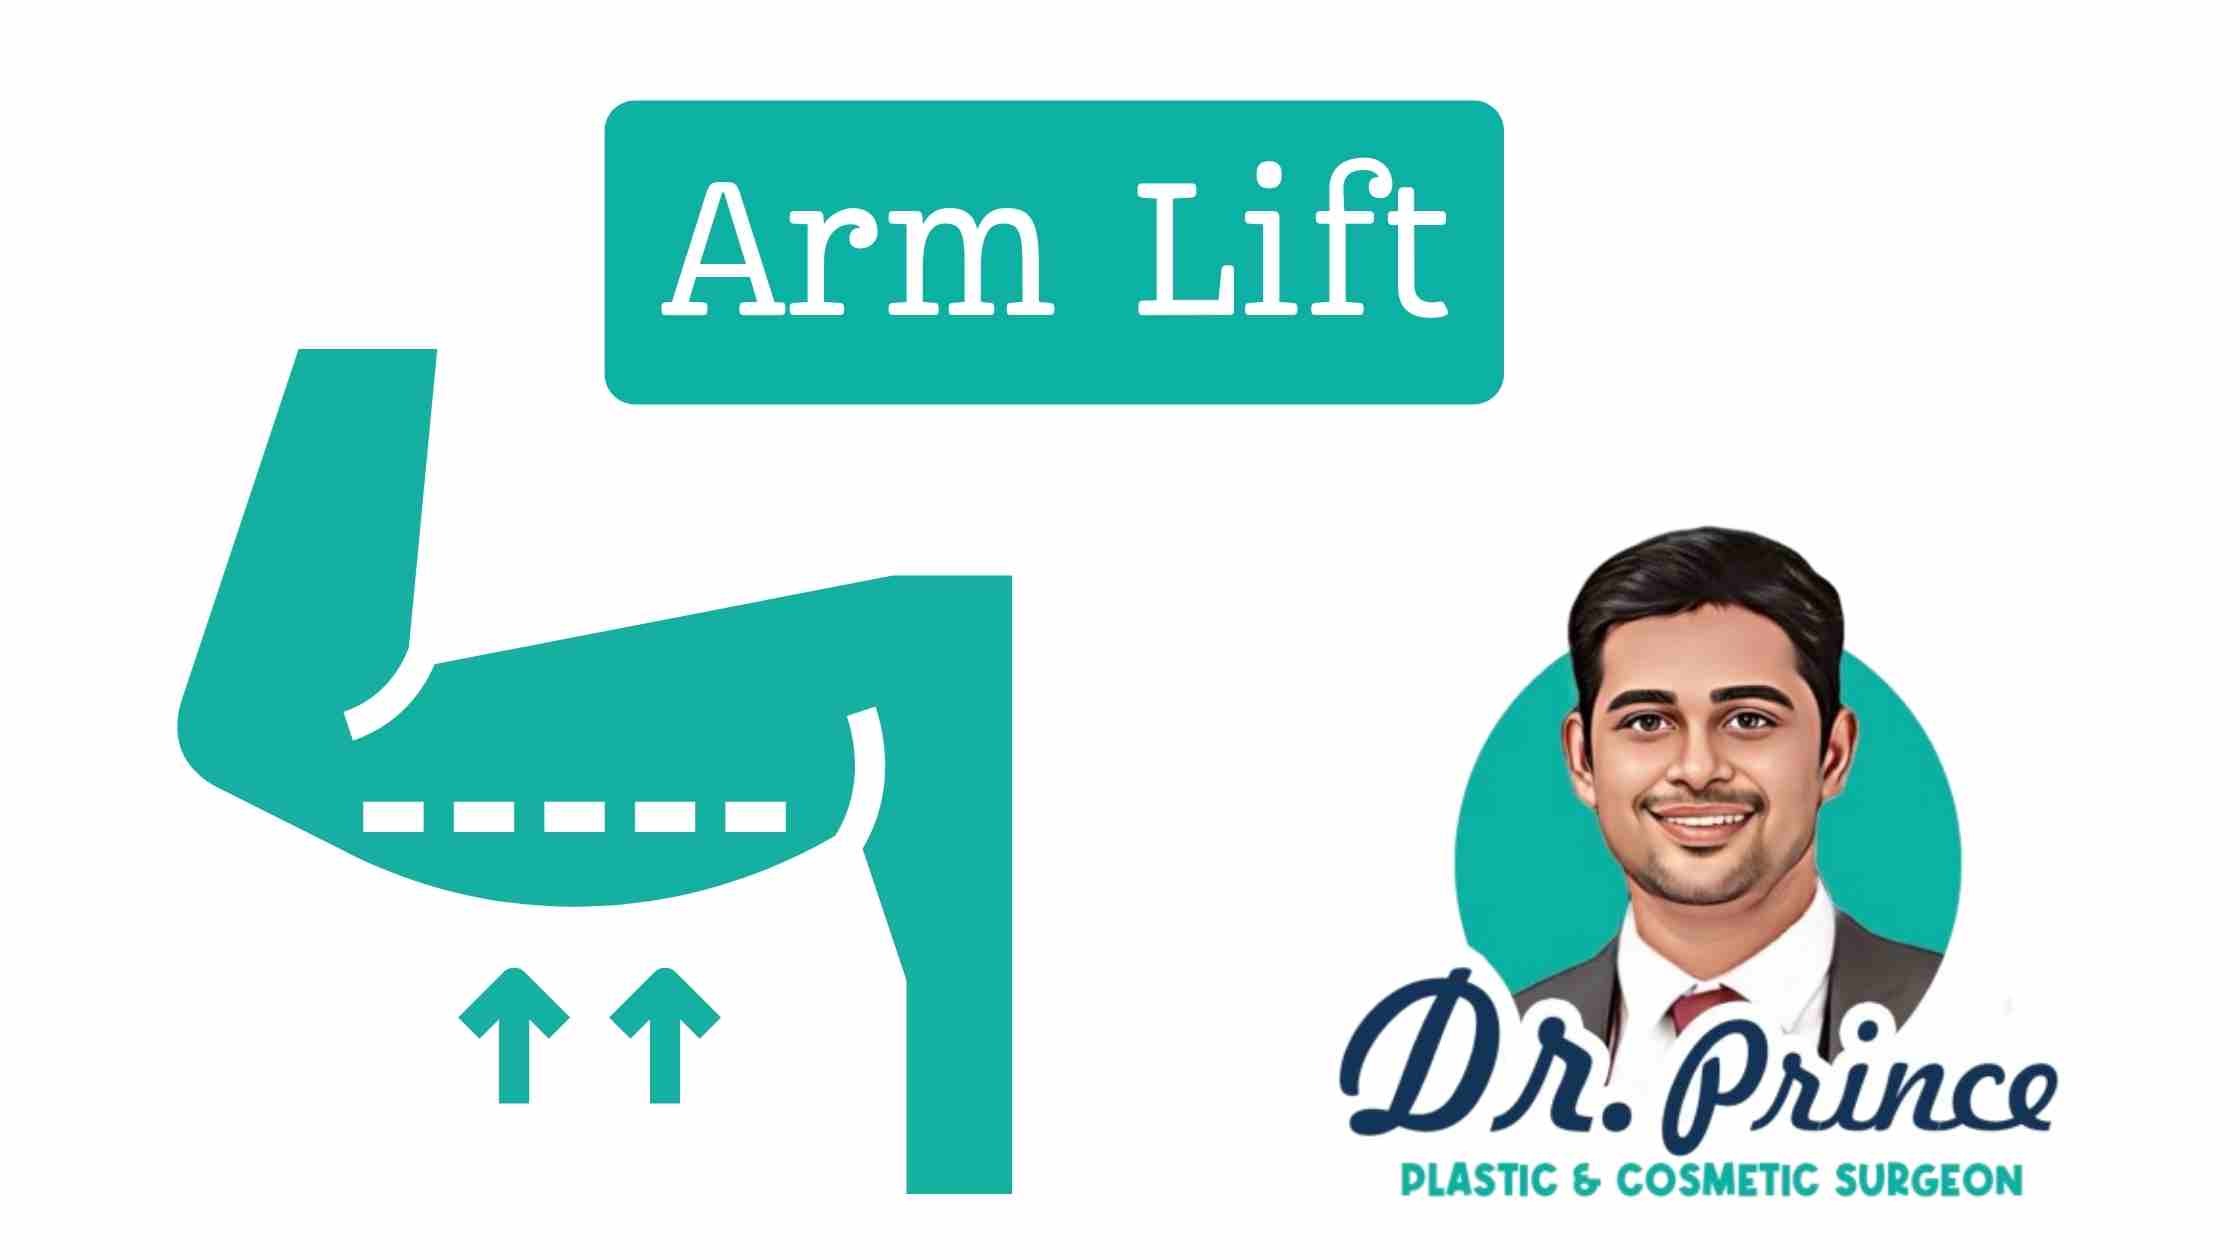 Before and after images showcasing transformative arm lift results in Thrissur by Dr. Prince, a leading plastic surgeon.